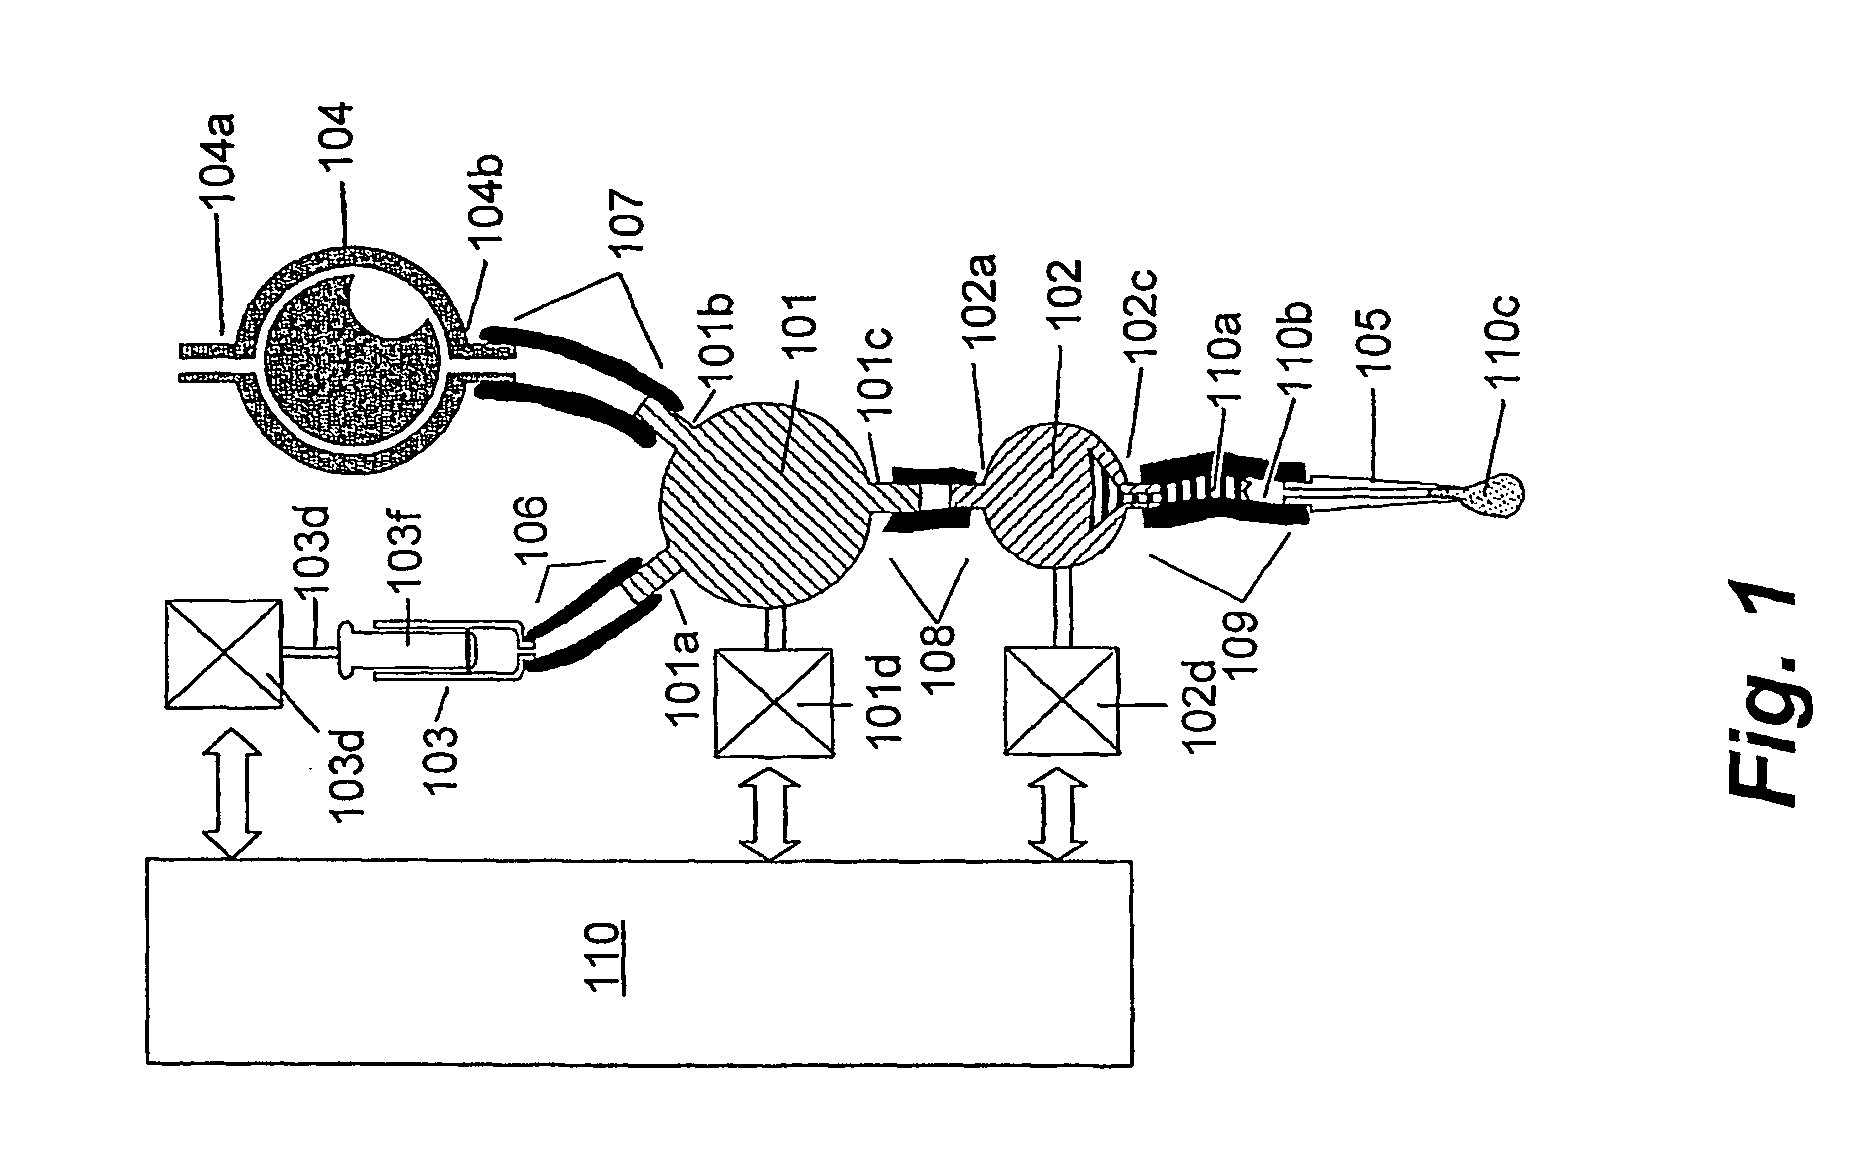 Microvalve controlled precision fluid dispensing apparatus with a self-purging feature and method for use